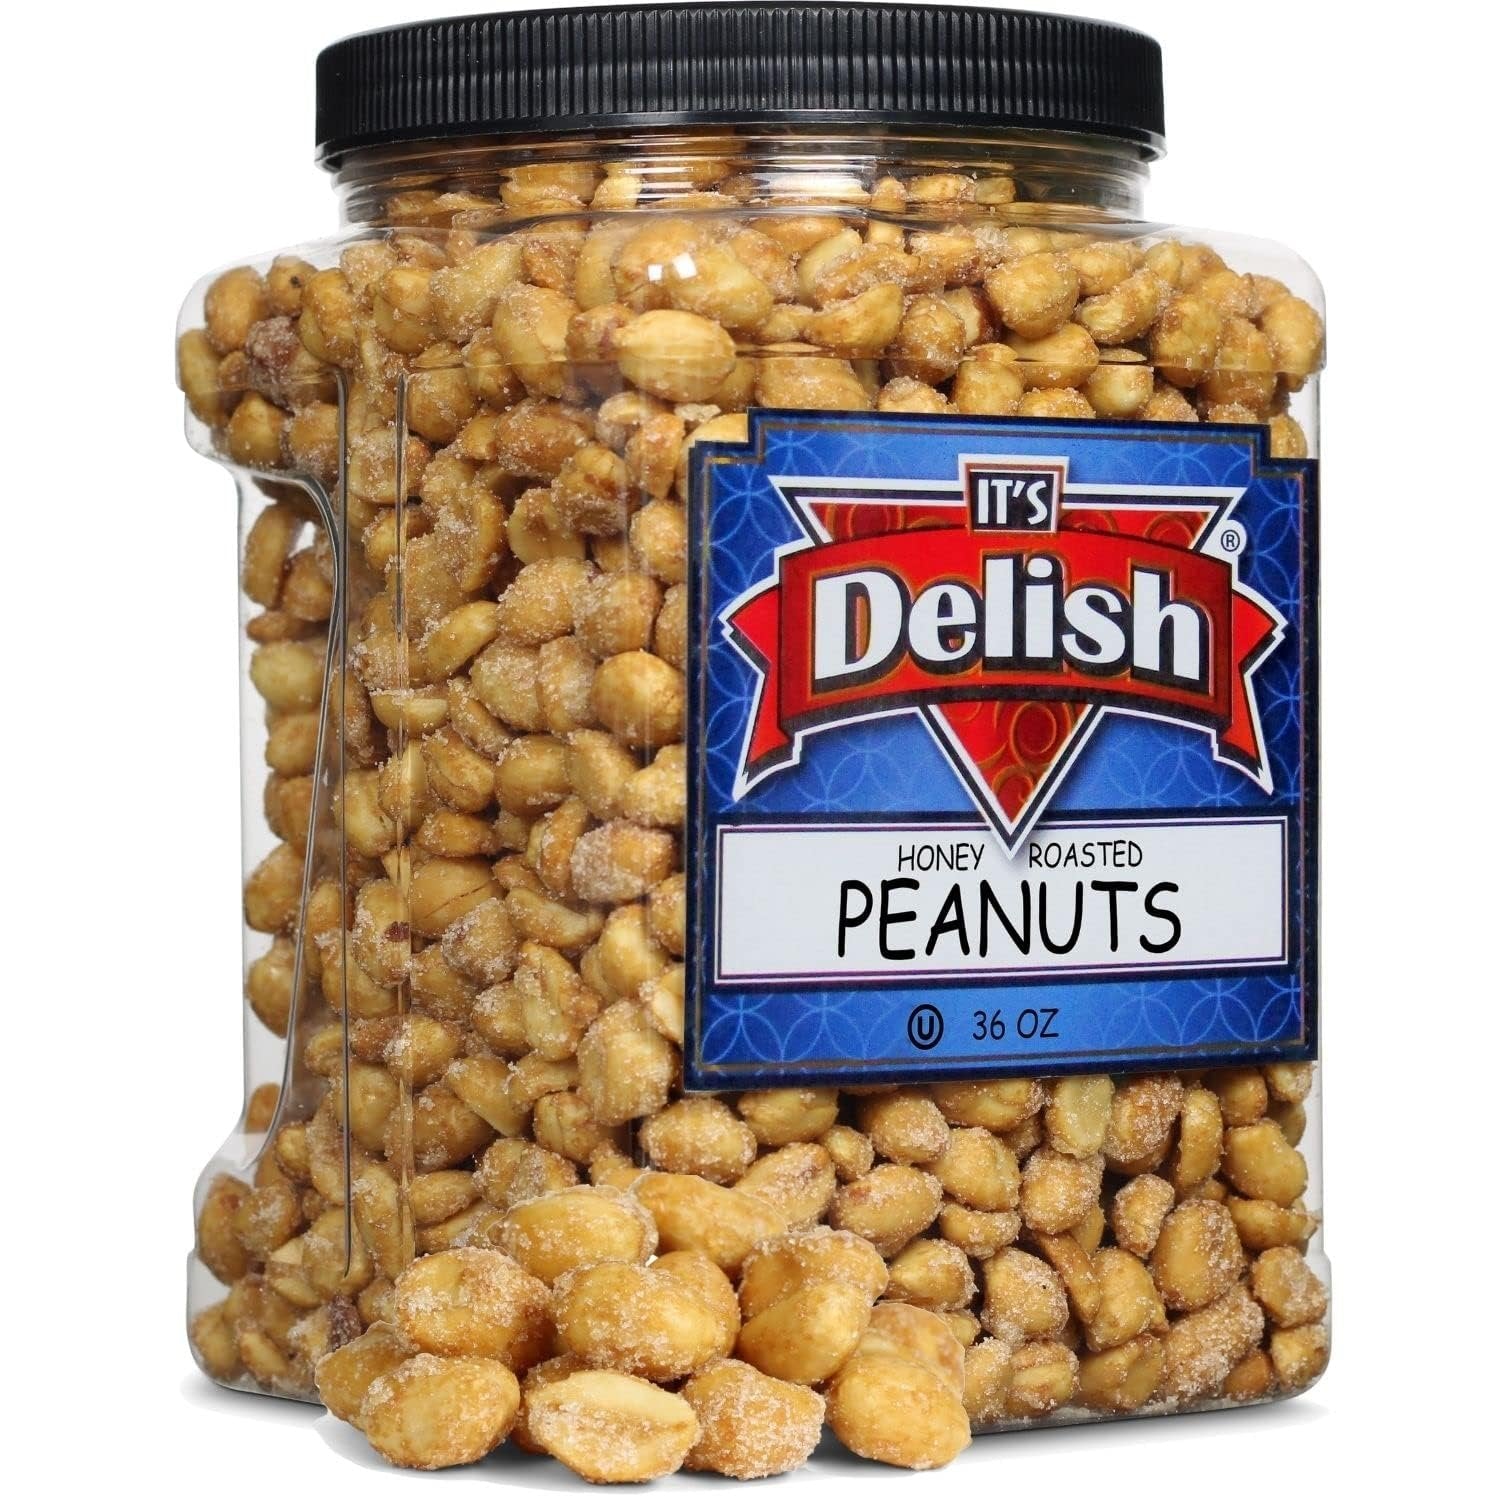 Honey Roasted Mixed Nuts by It's Delish 12 Oz